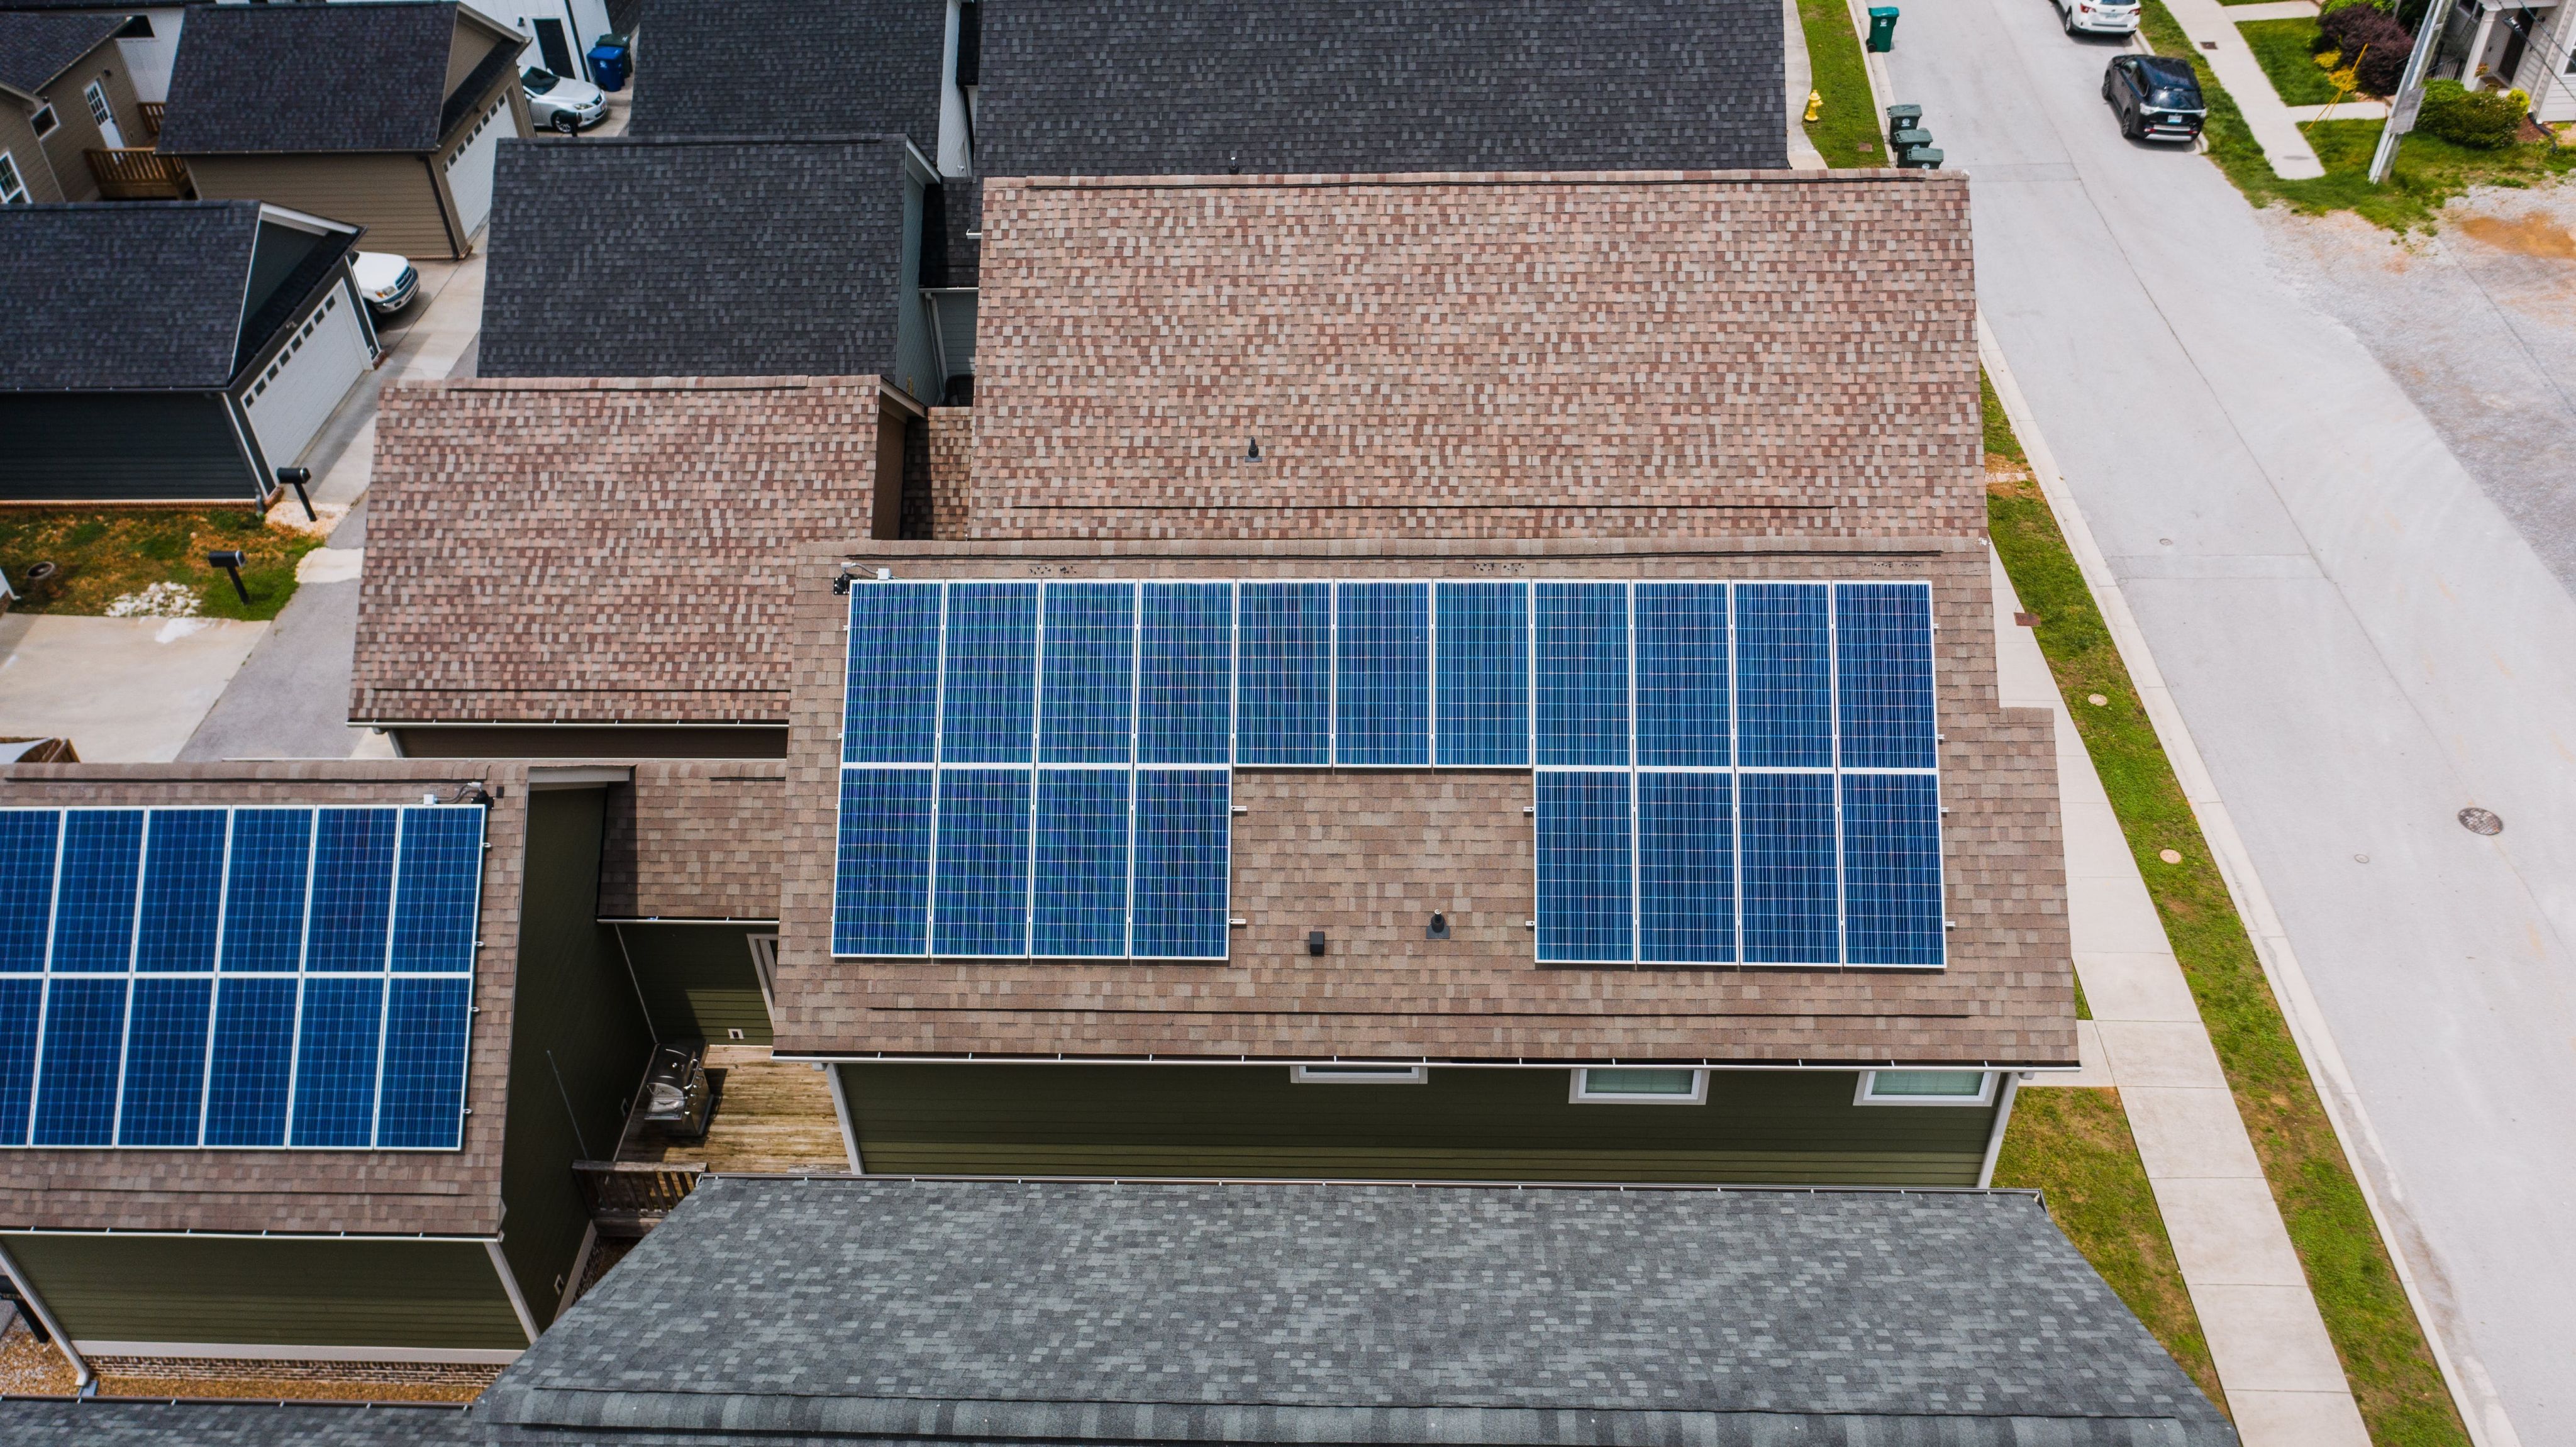 Aerial view of a house roof with solar panels